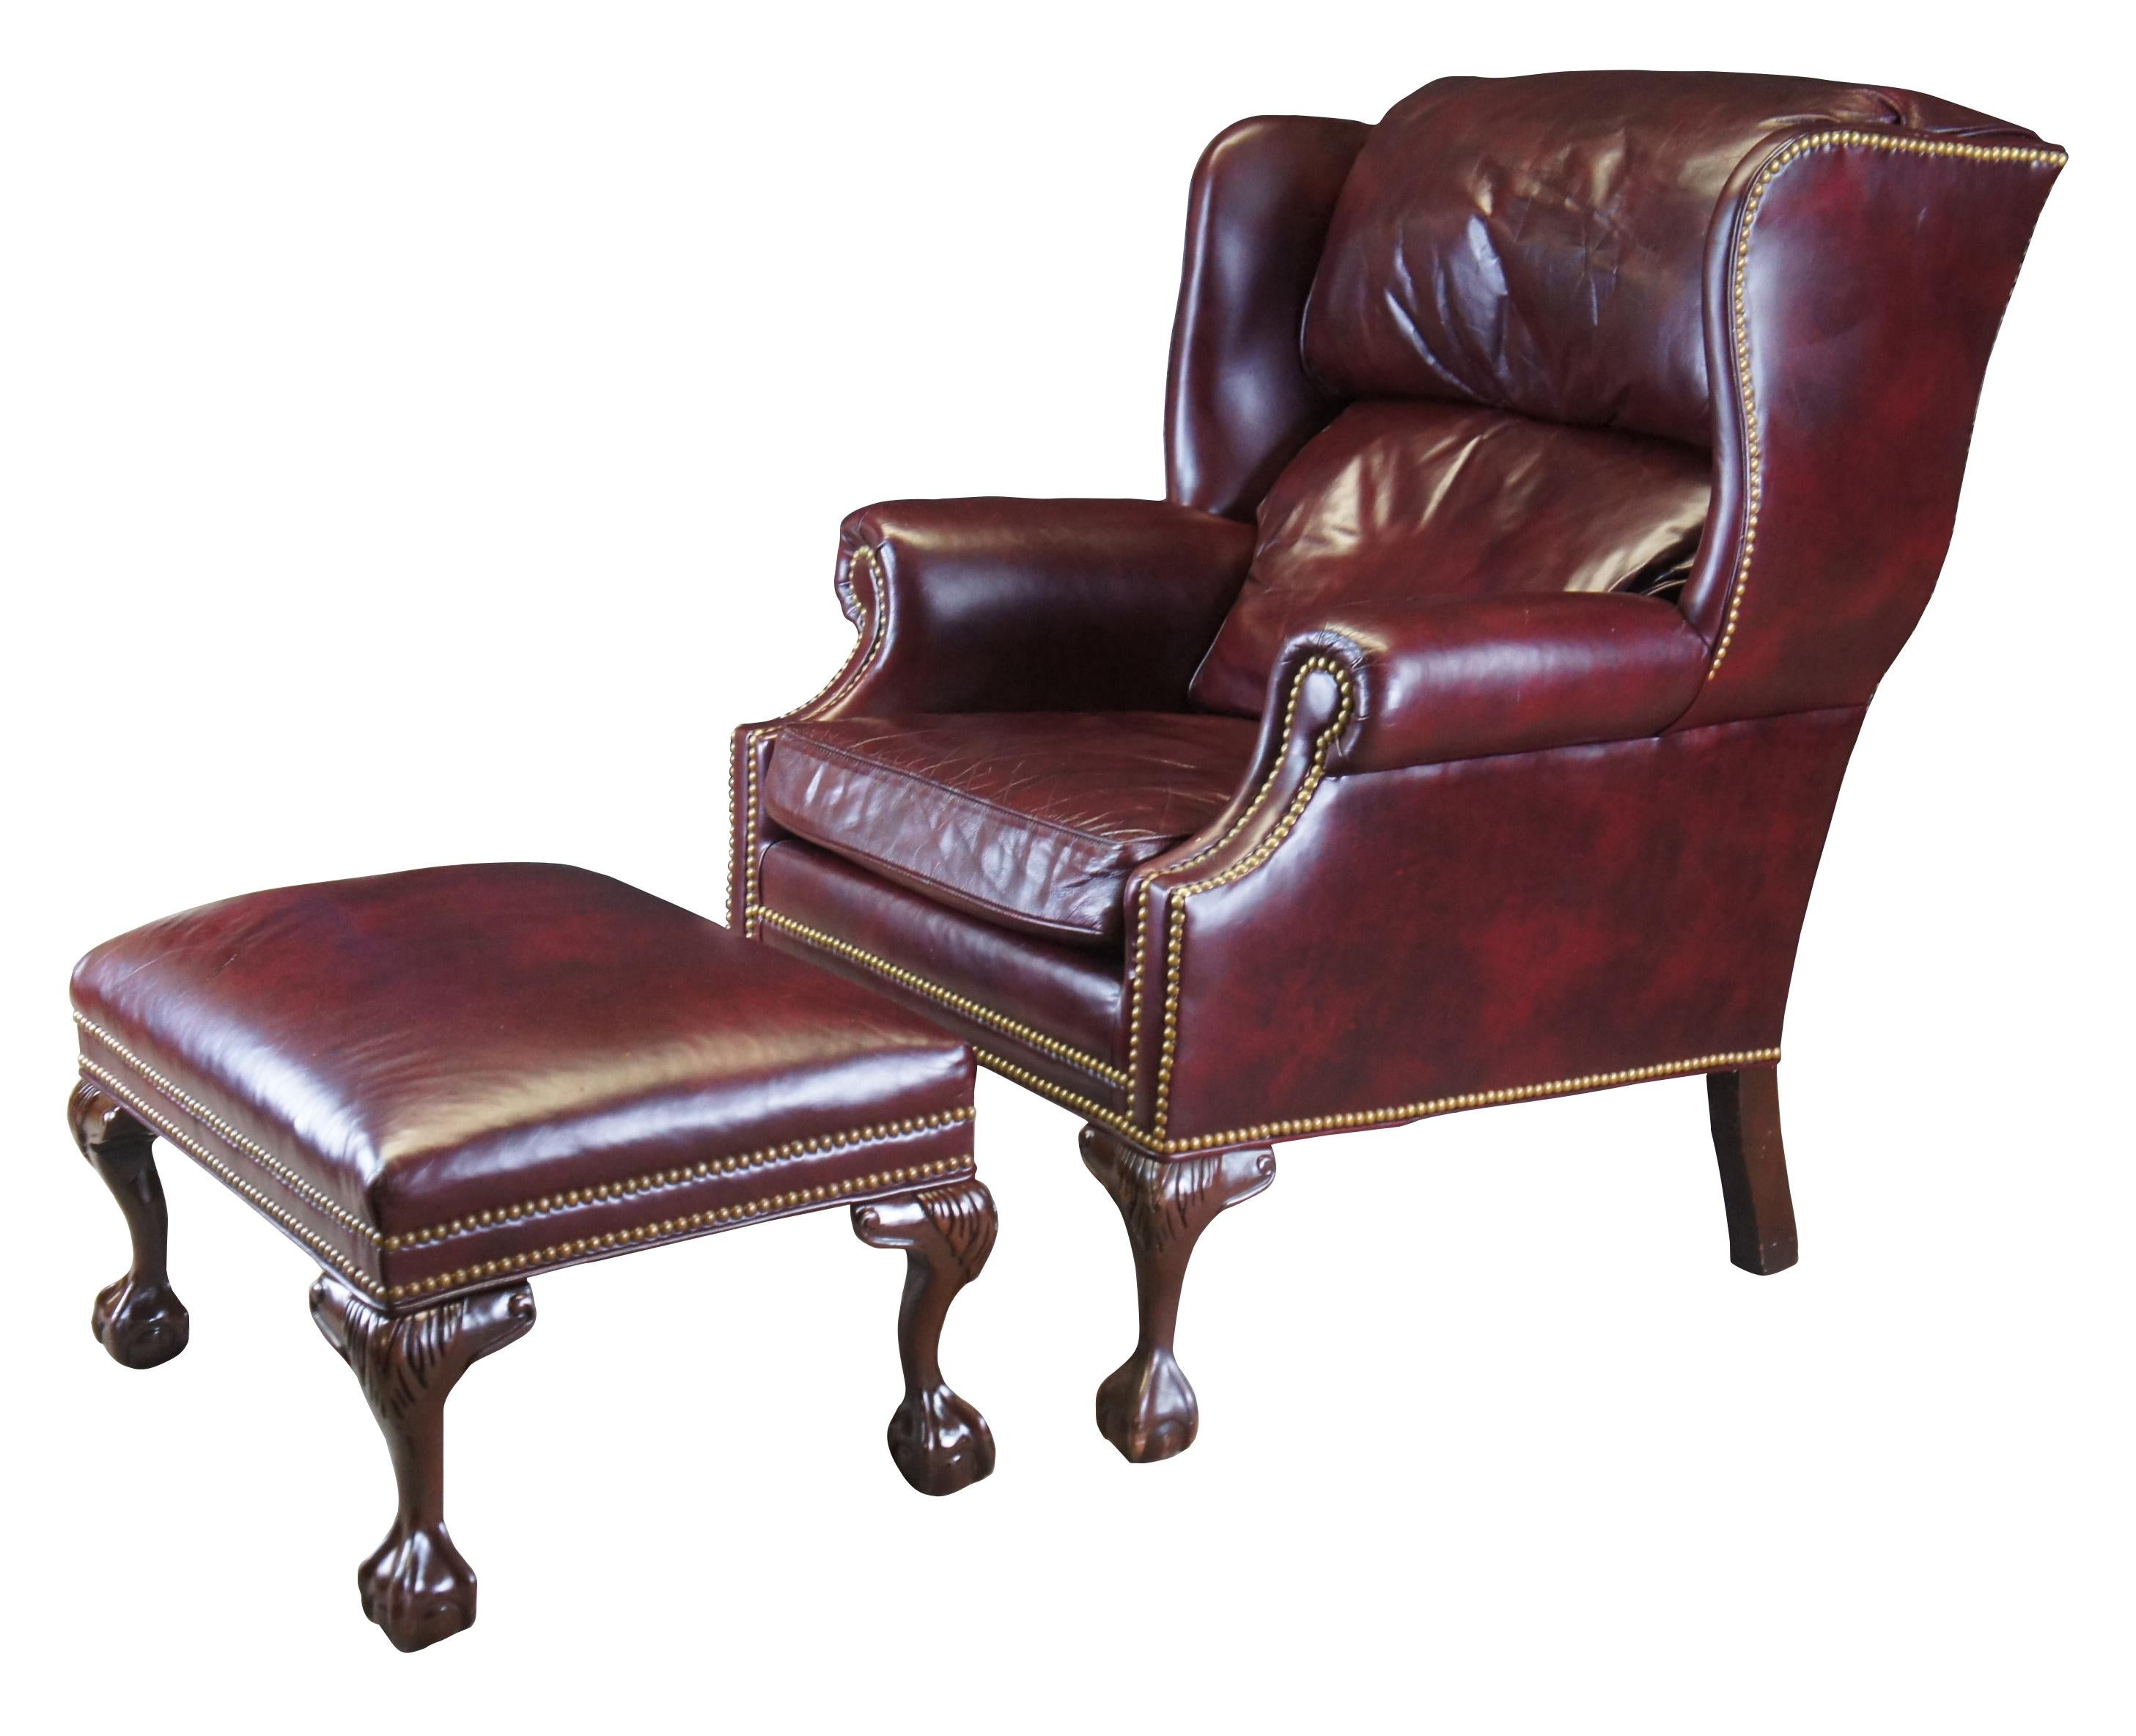 An eye catching wingback chair and ottoman by Hancock & Moore, circa last quarter 20th century.  Inspired by classic English Georgian styling.  Features a hooded back with rolled arms and brass nail head trim.  The chair is supported by carved